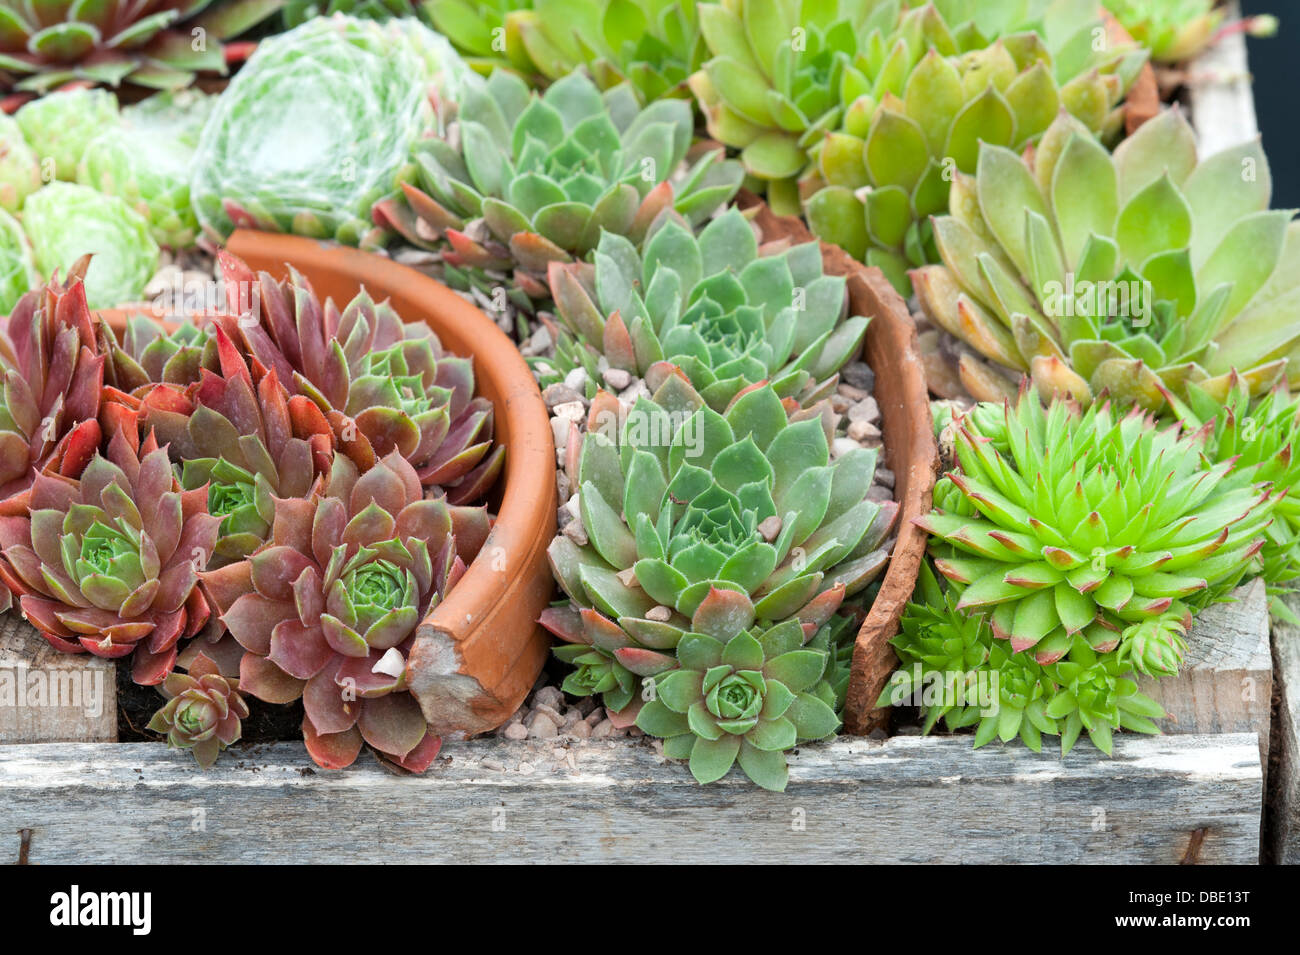 mixed sempervivum in variety planted in broken teracotta pots and wooden crate Stock Photo